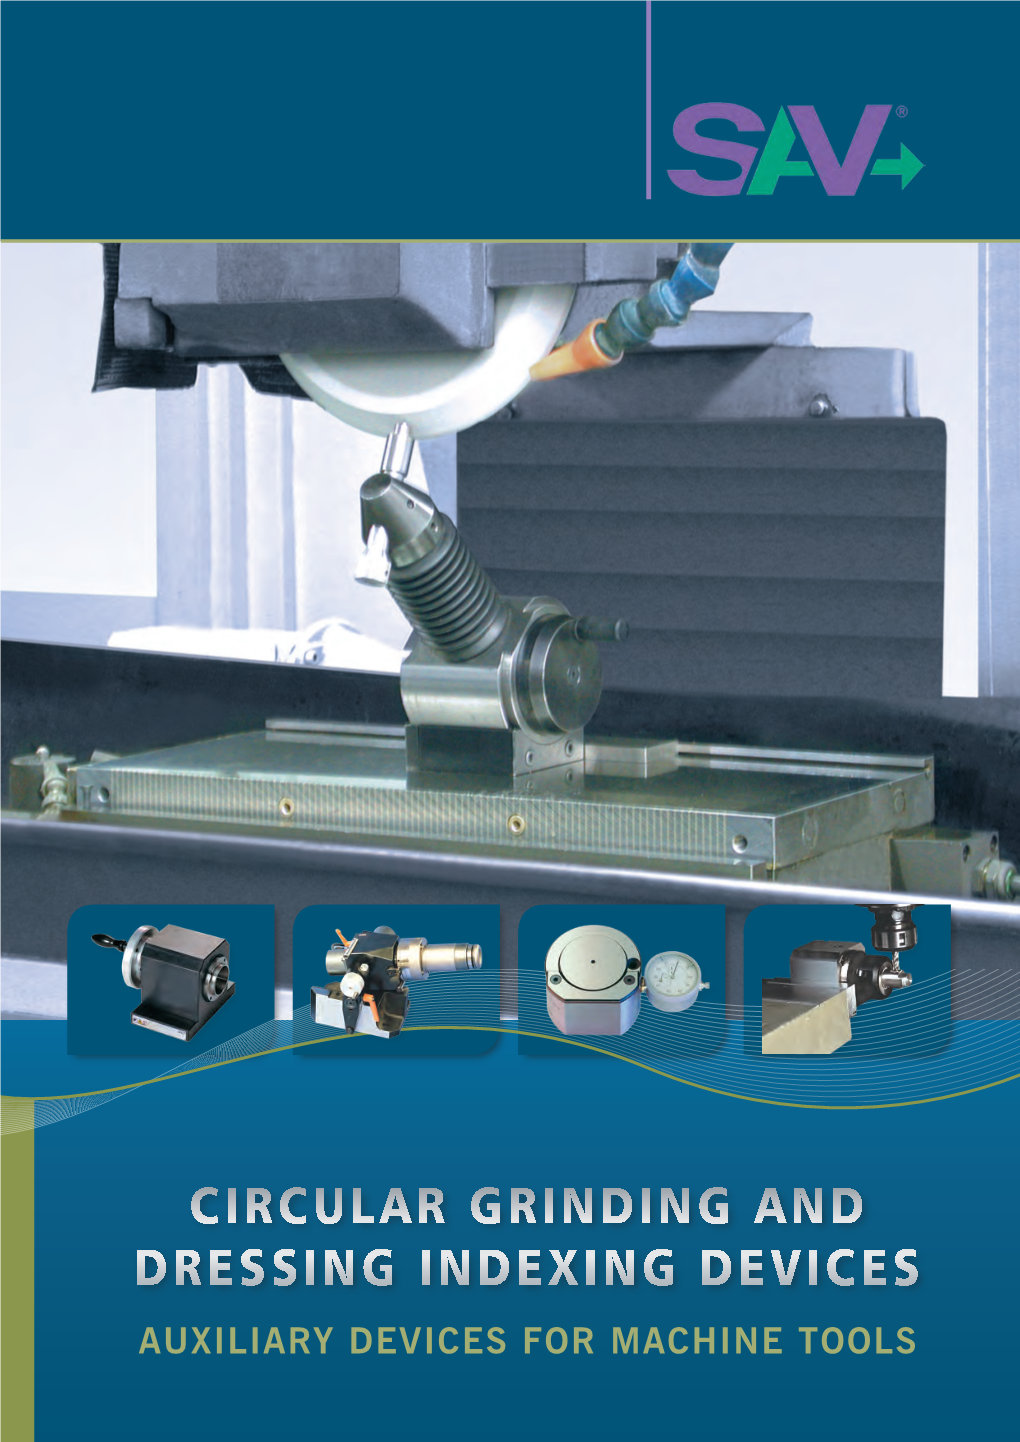 Circular Grinding and Dressing Indexing Devices Auxiliary Devices for Machine Tools Contents